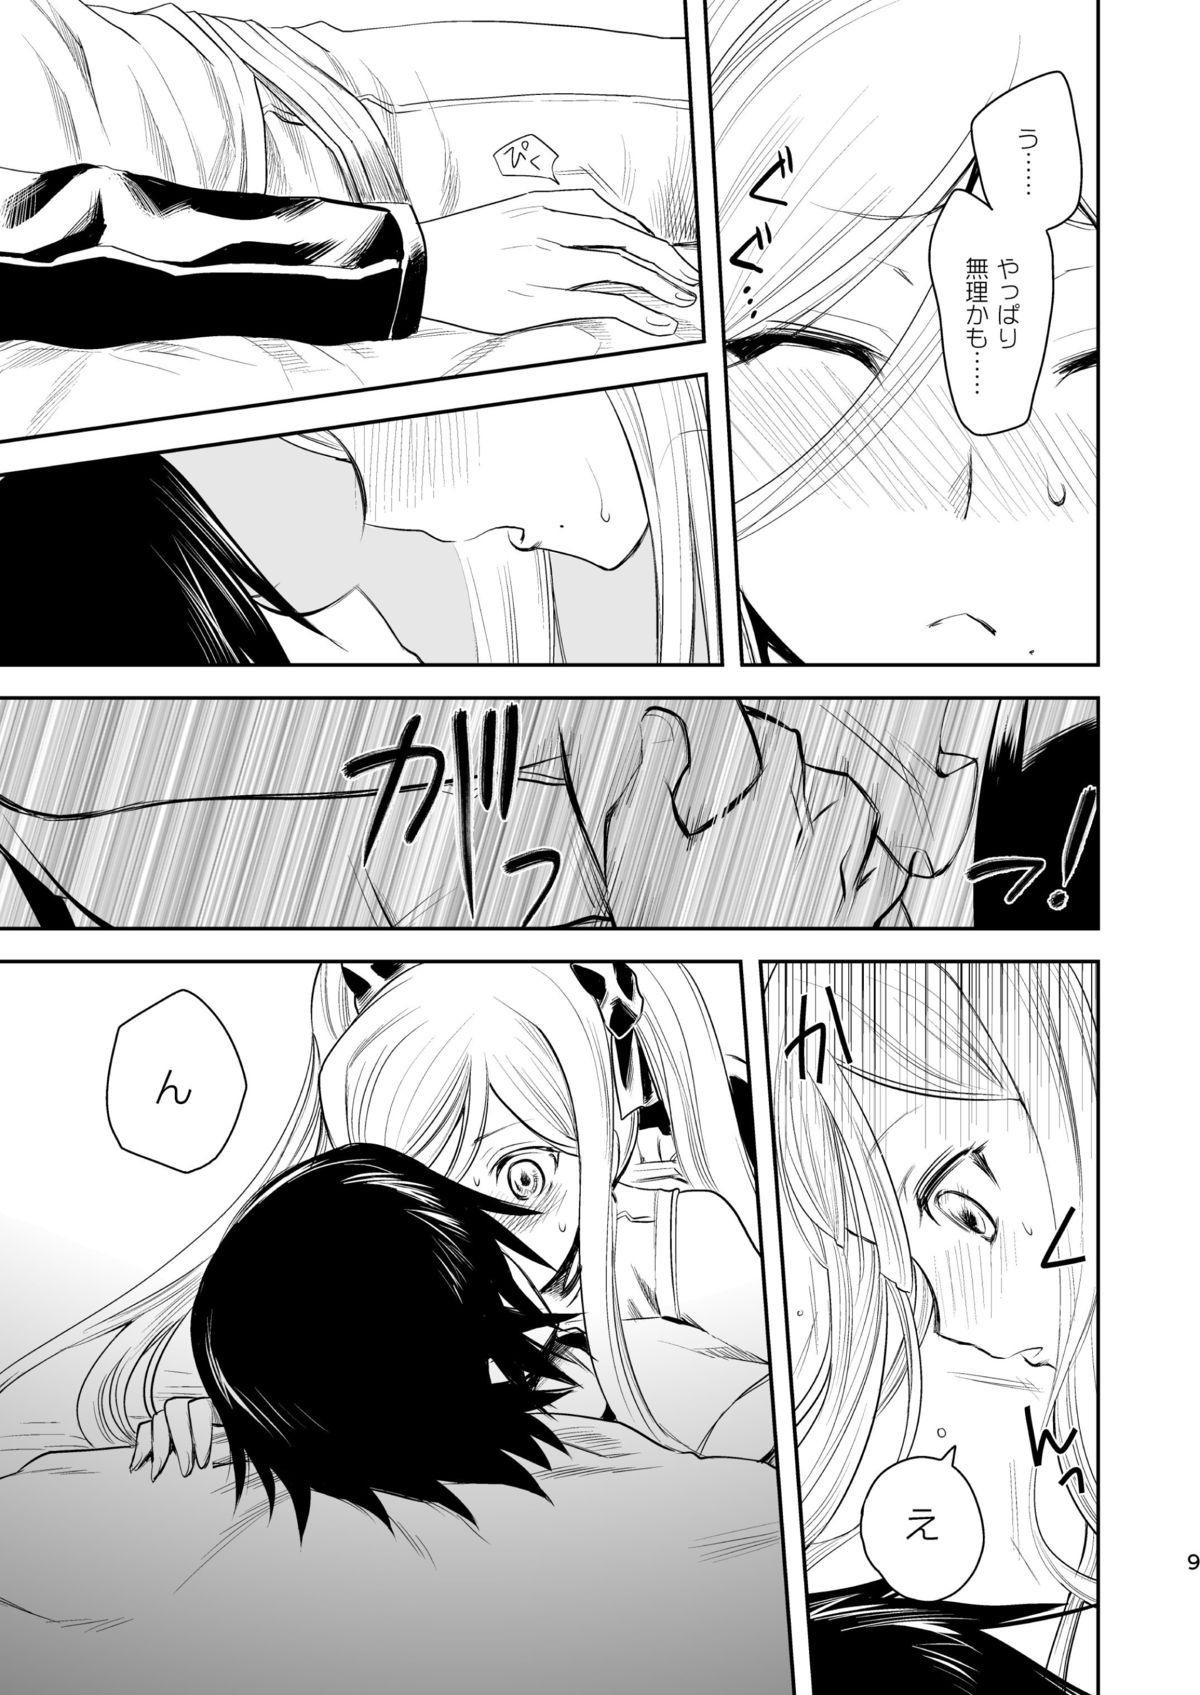 Fucking Hard Now Updating! - Arpeggio of blue steel Pov Blow Job - Page 8